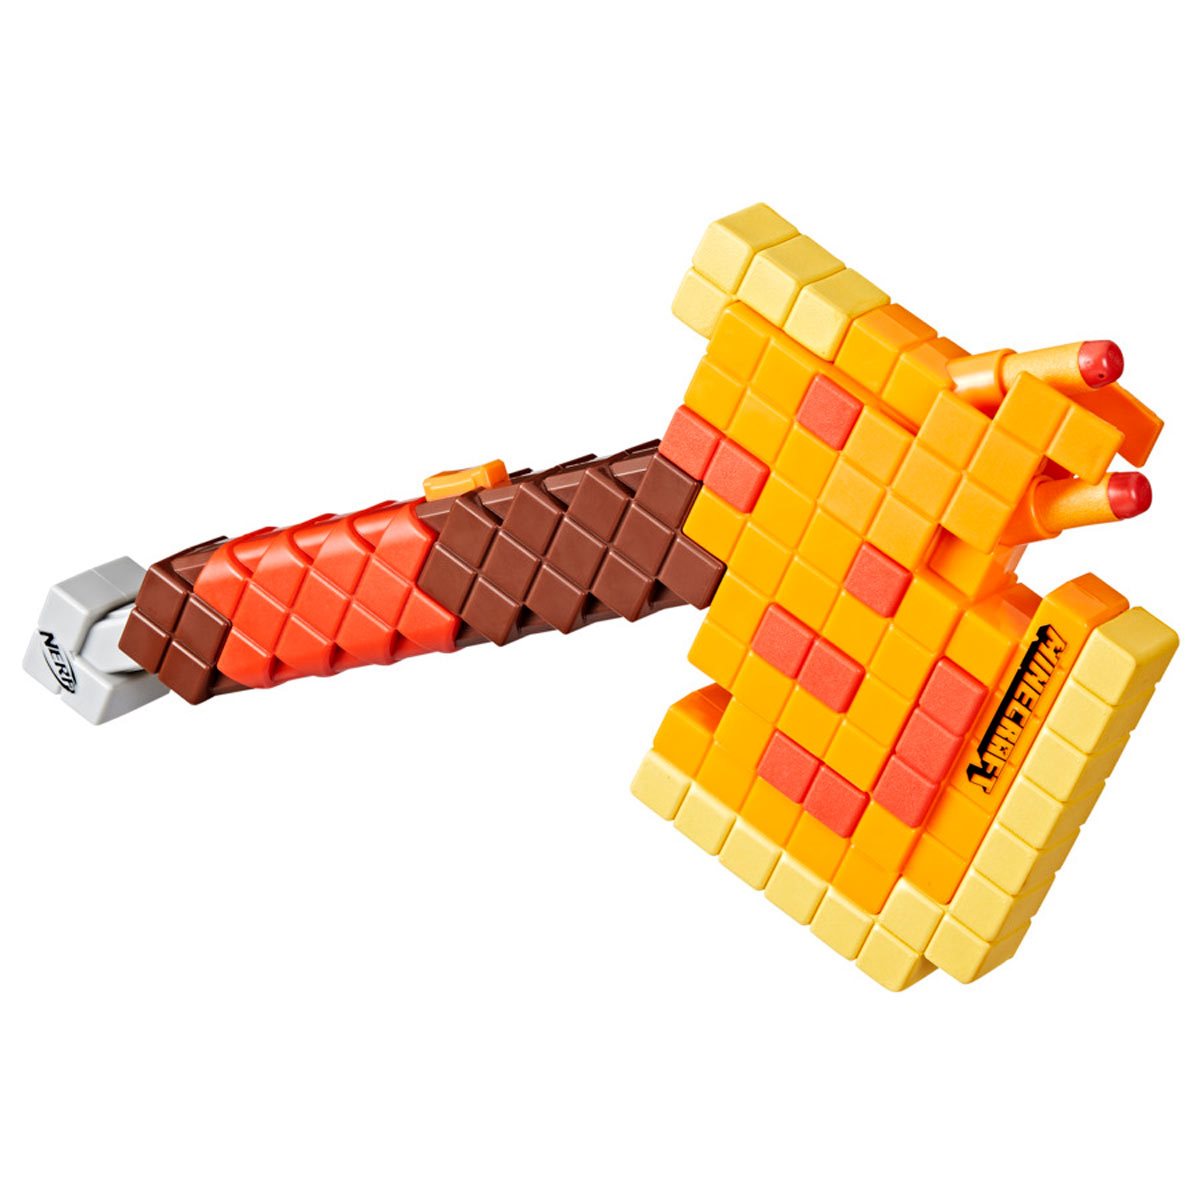 NERF Minecraft Pillager's Crossbow, Dart-Blasting Crossbow, Includes 3  Elite Darts, Real Crossbow Action, Pull-Back Priming Handle